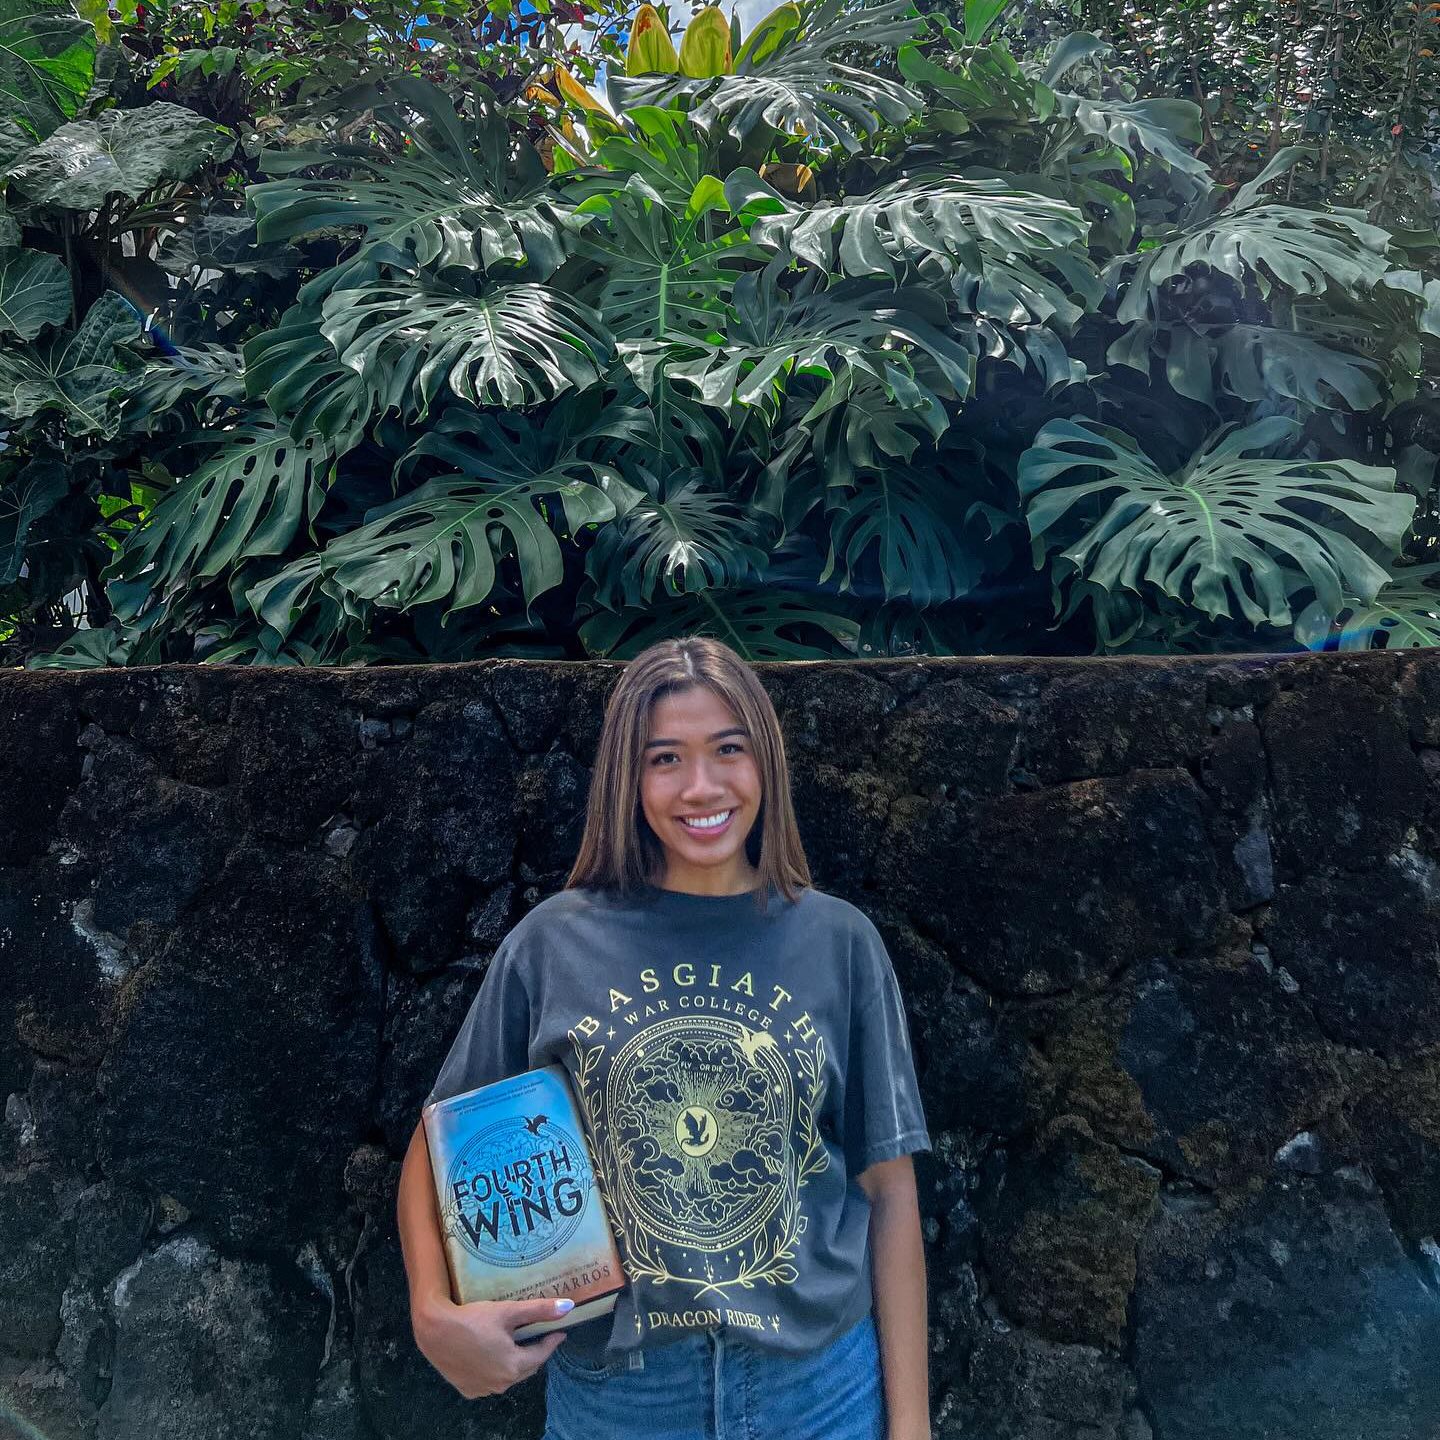 Leira Joyce repping a Basgiath War Collage T-shirt while holding a copy of Fourth Wing